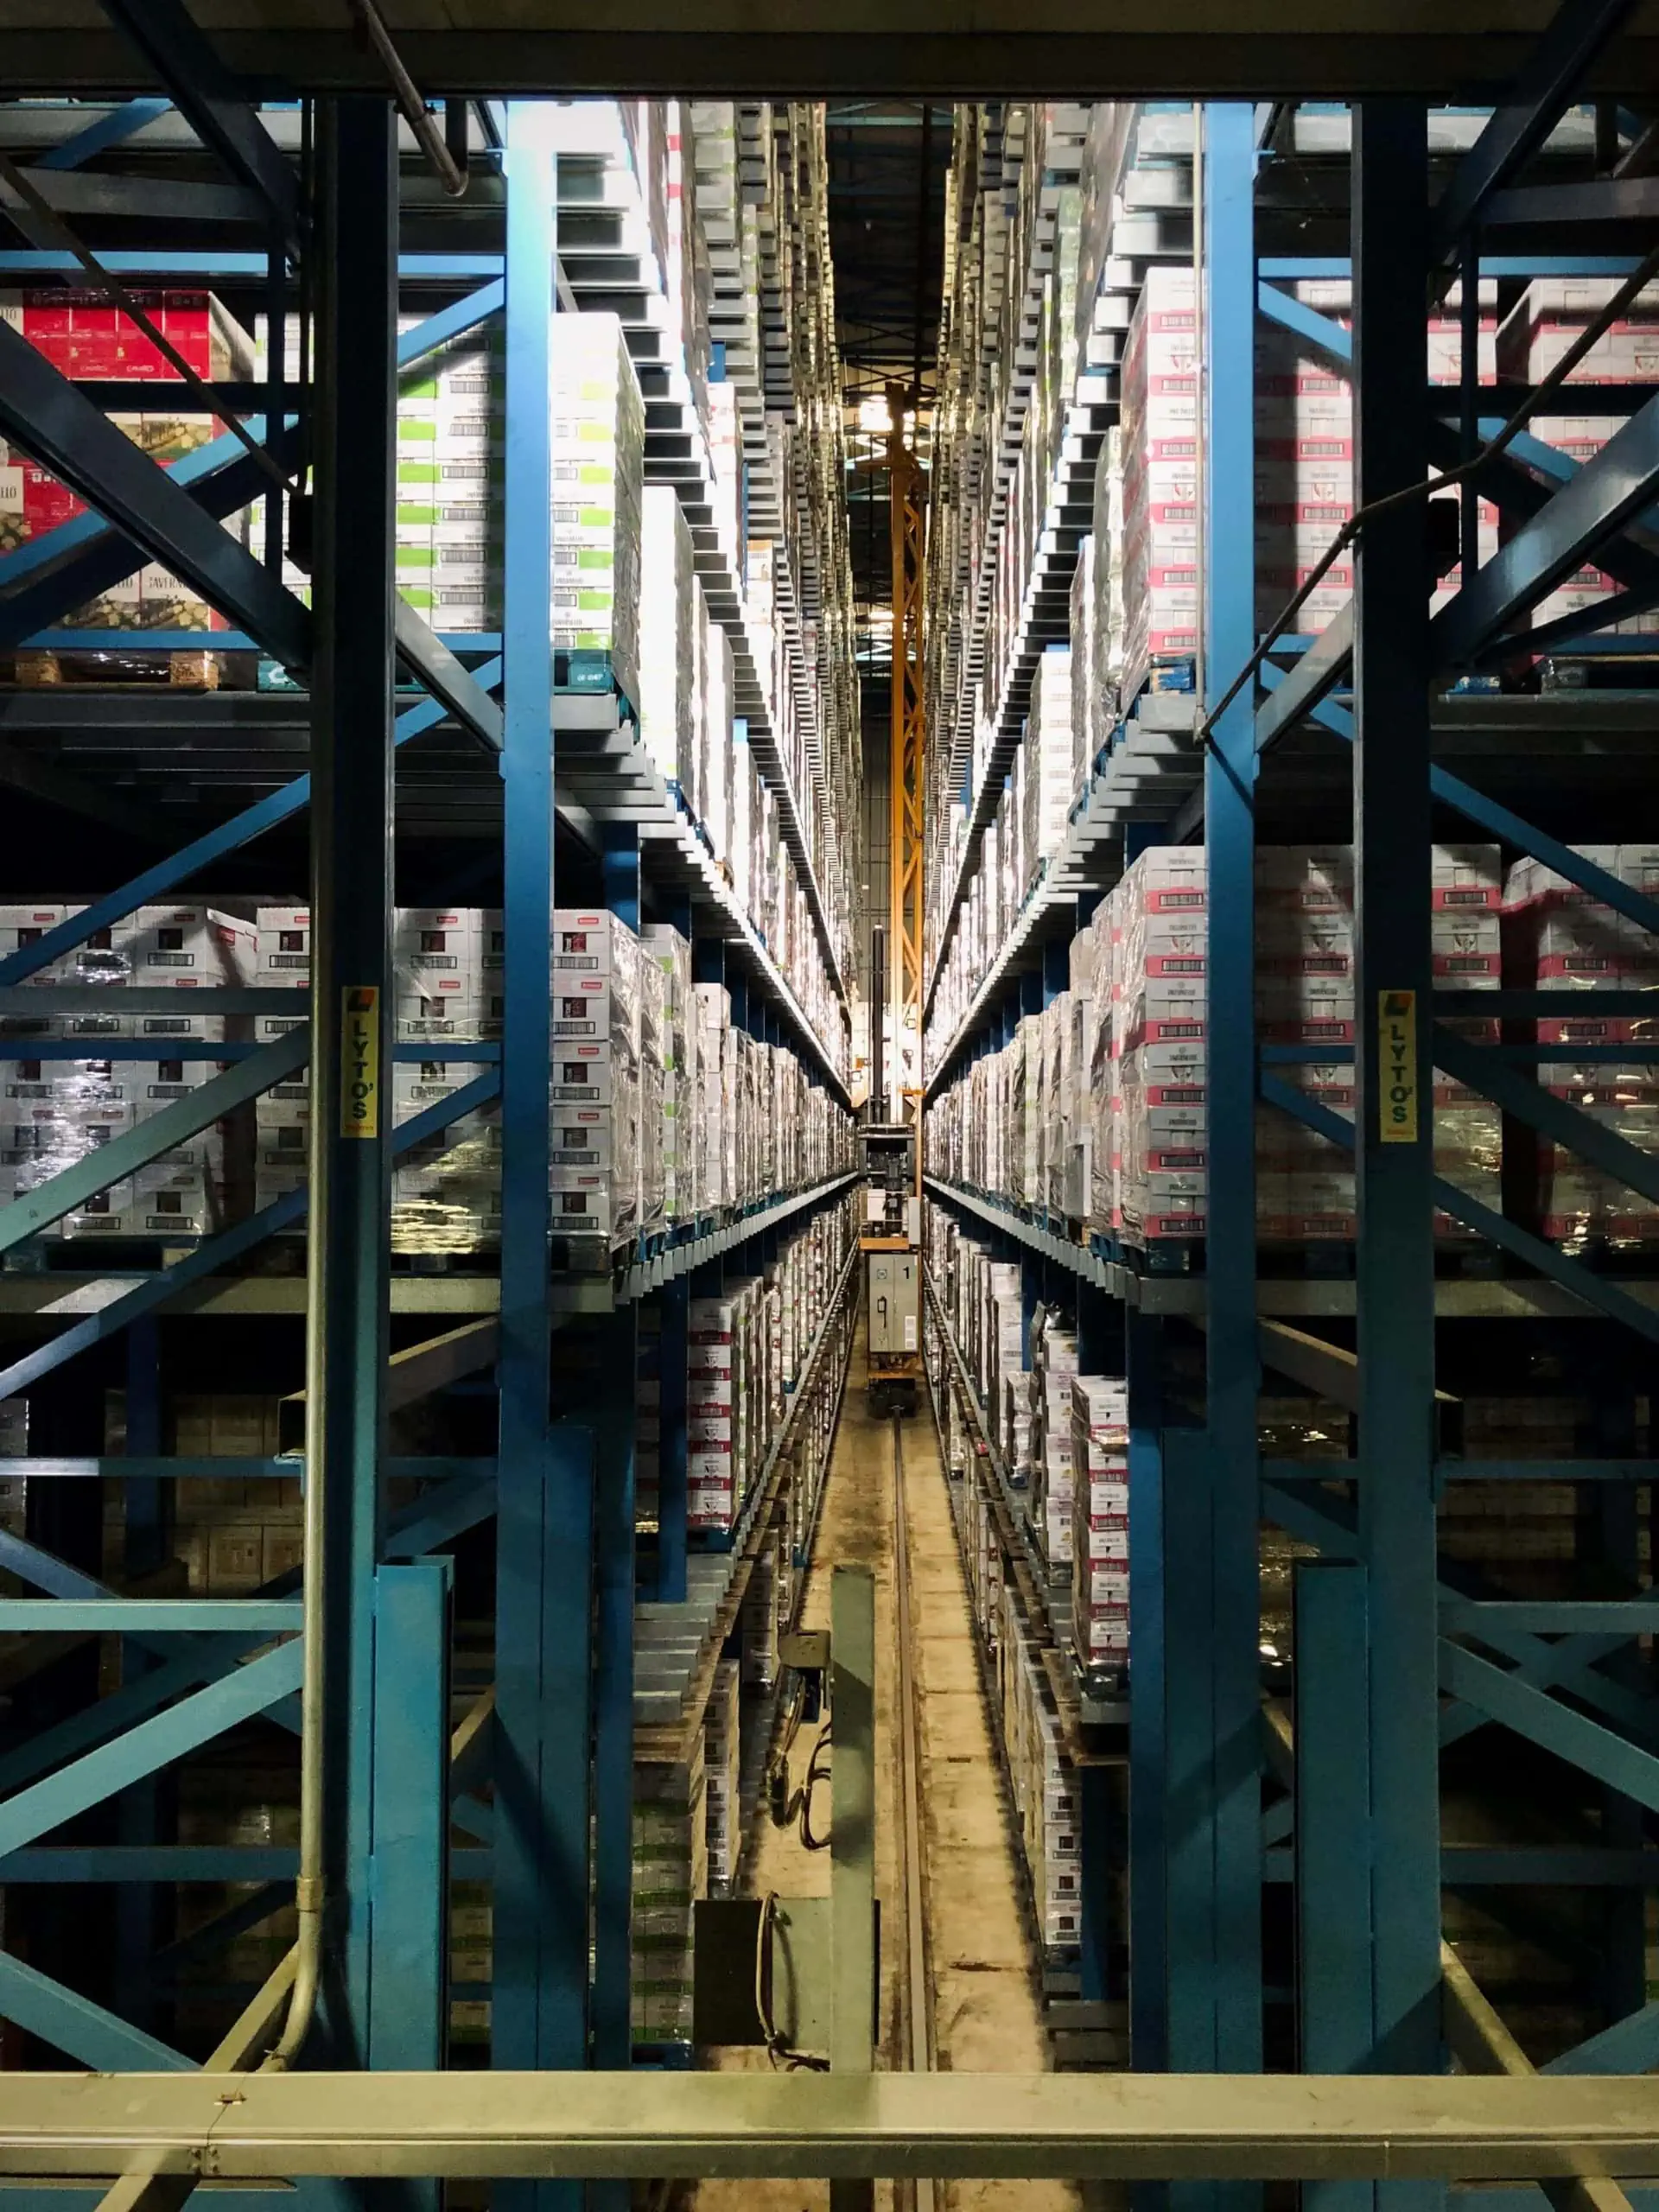 Footage of warehouse stock room can be found on the video analytics platform